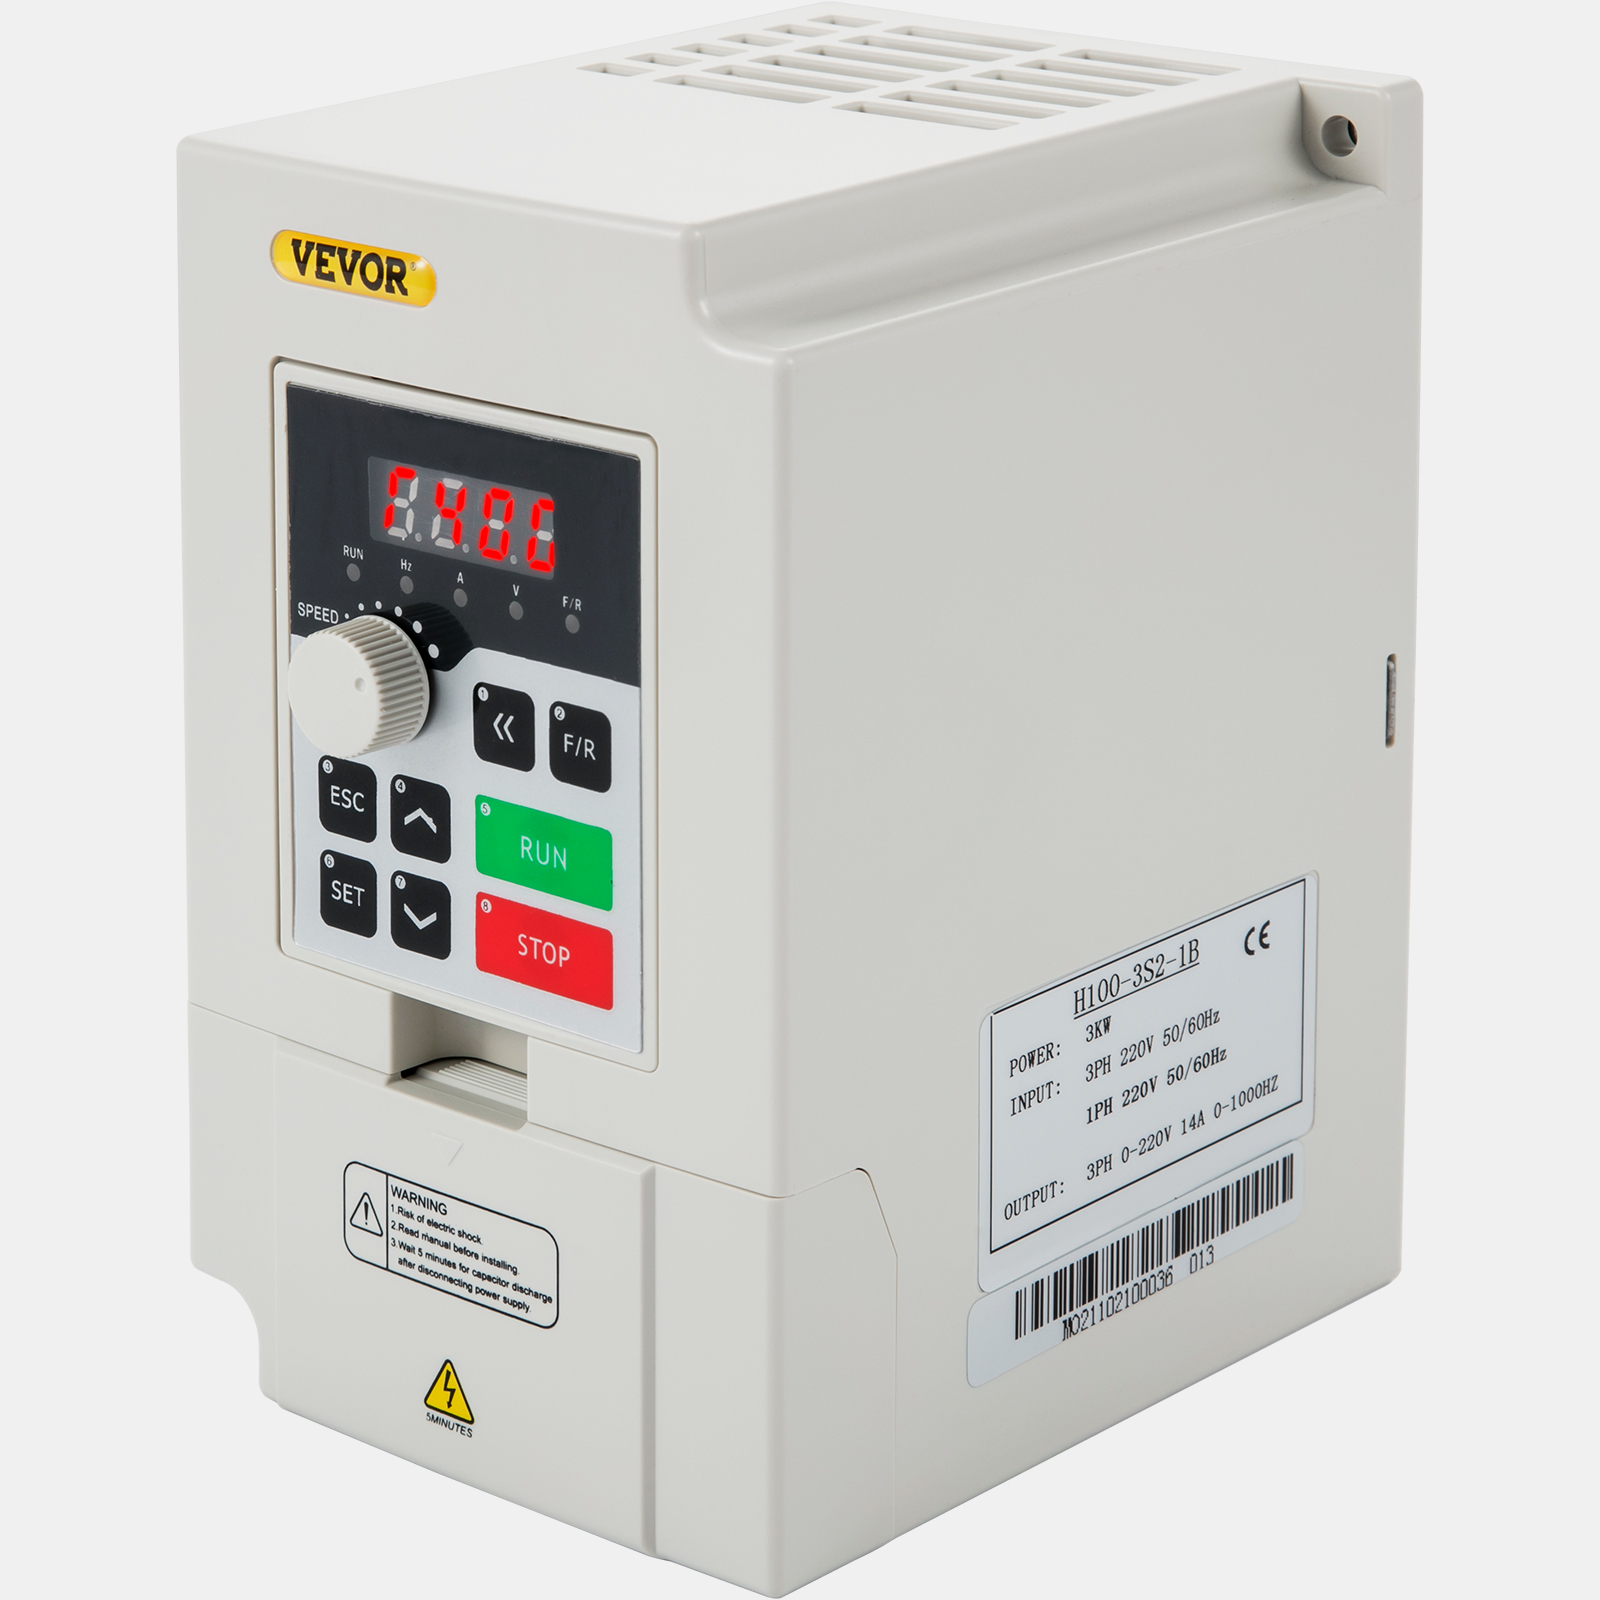 Variable Frequency Drive,1.5 KW,2 HP